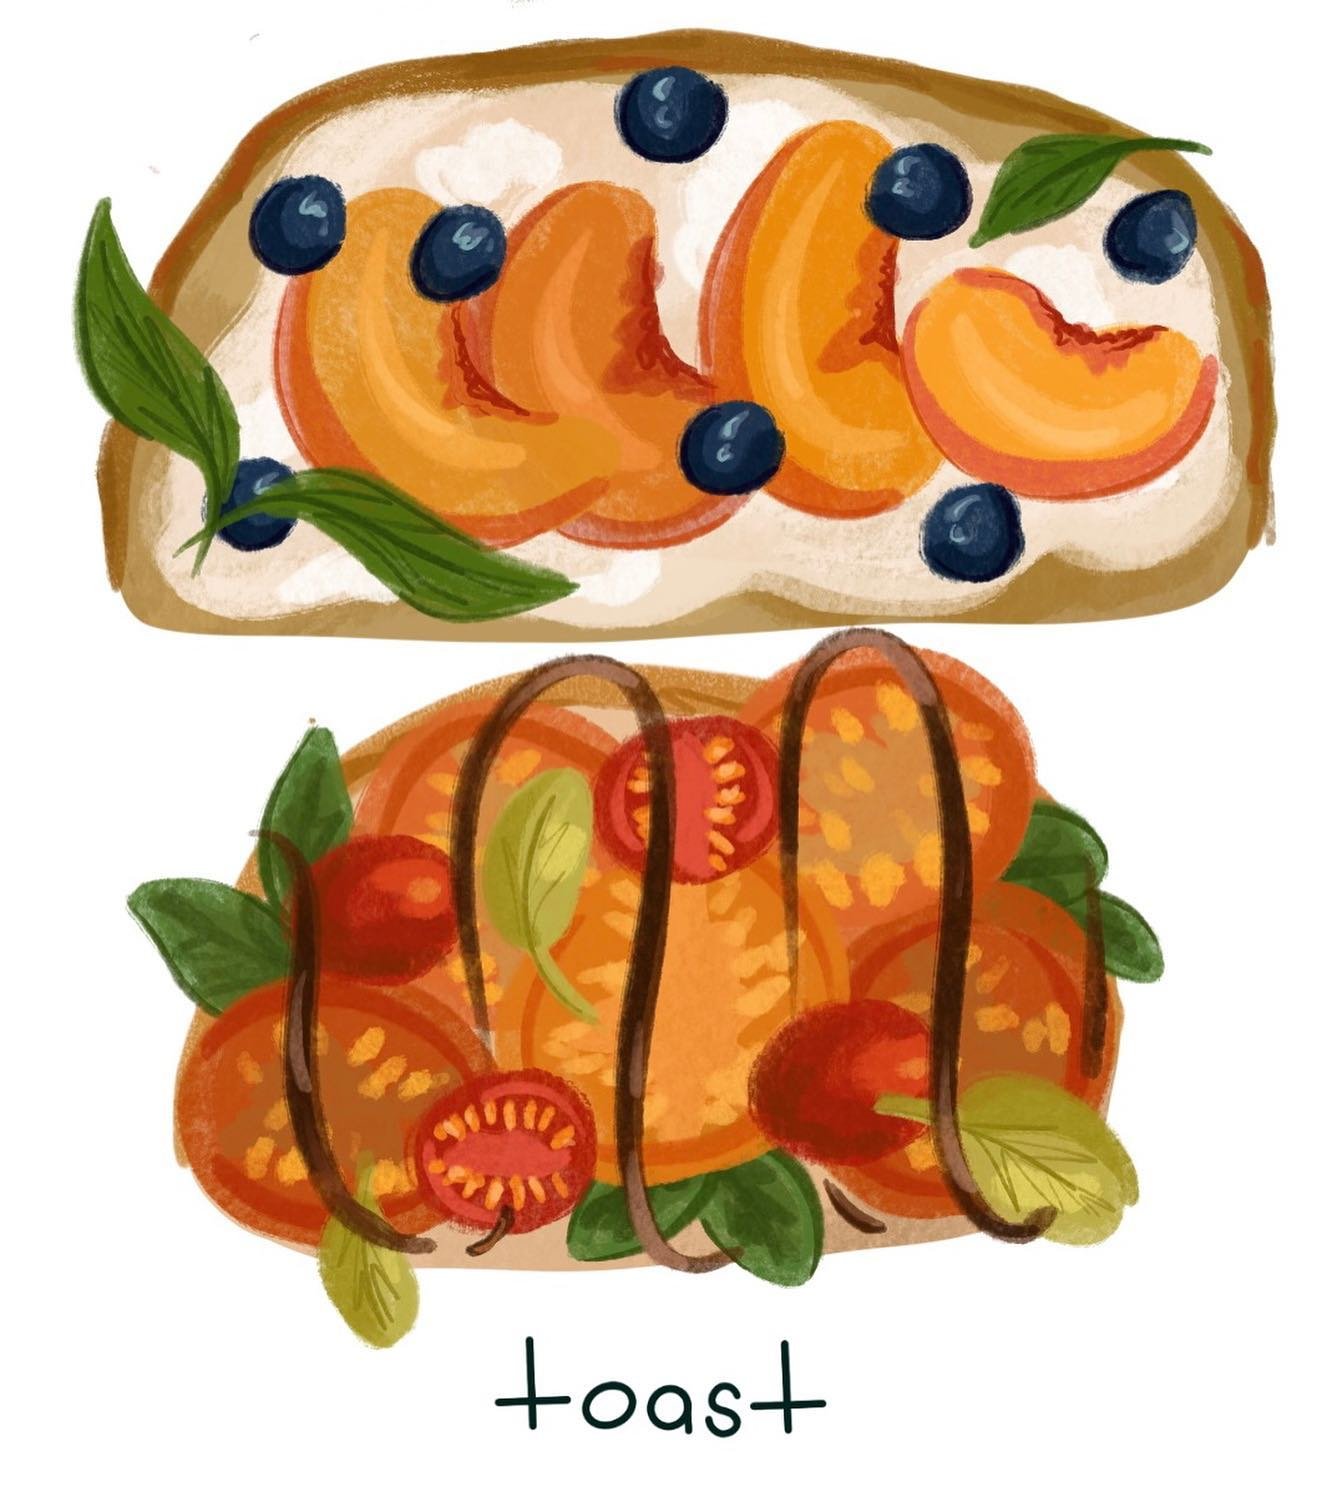 if there&rsquo;s one thing I love, it&rsquo;s drawing toast 

#illustration #illustrationartists #illustrator #art #artist #artistsoninstagram #foodillustrator #foodillustration #food #toast #toastillustration #toastart #fruitillustration #vegetablei